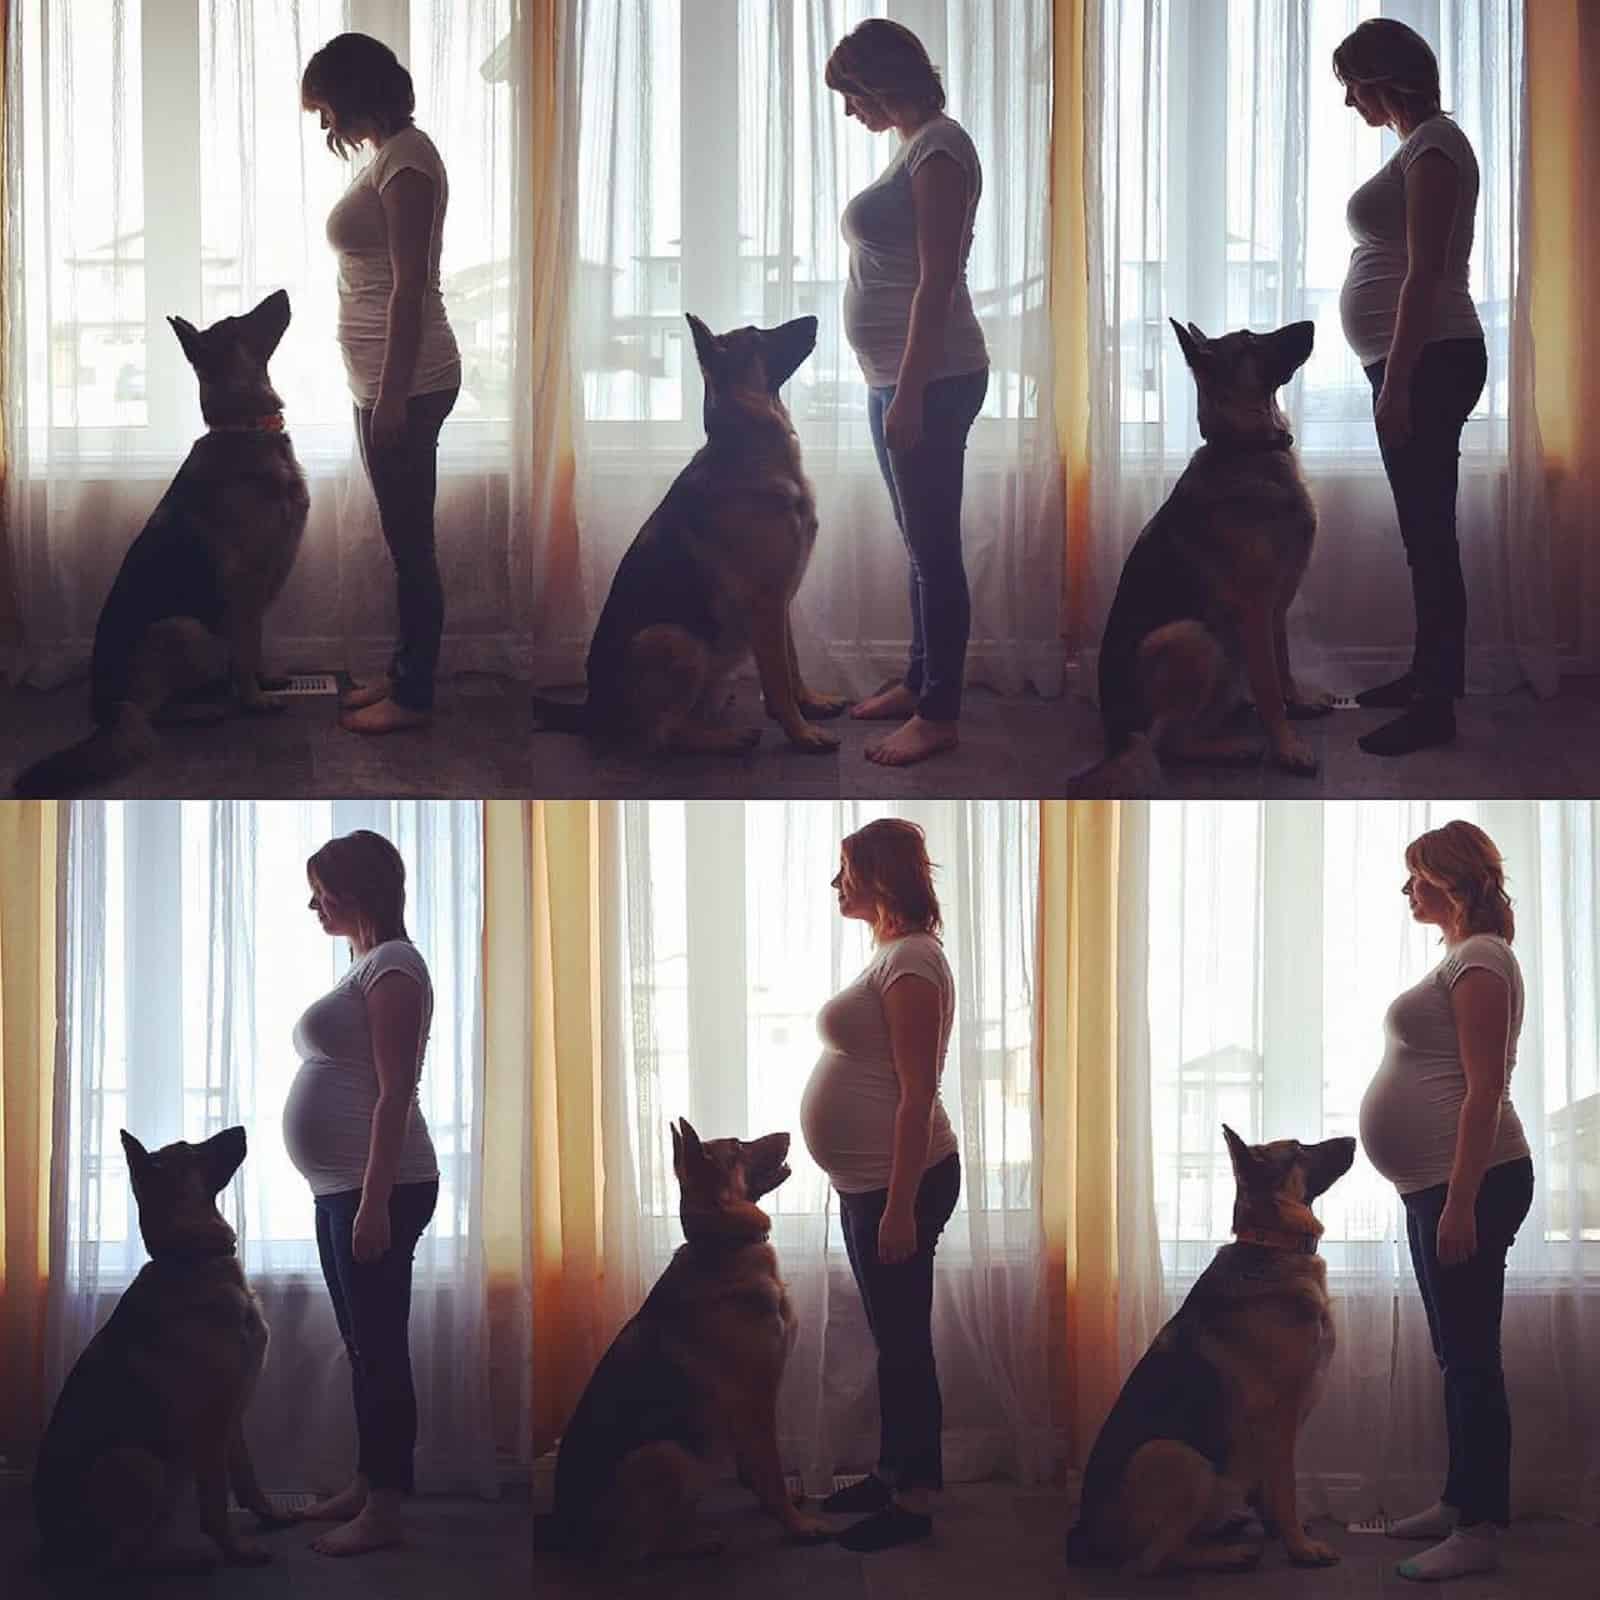 german shepherd standing in front of his pregnat owner and waiting for baby